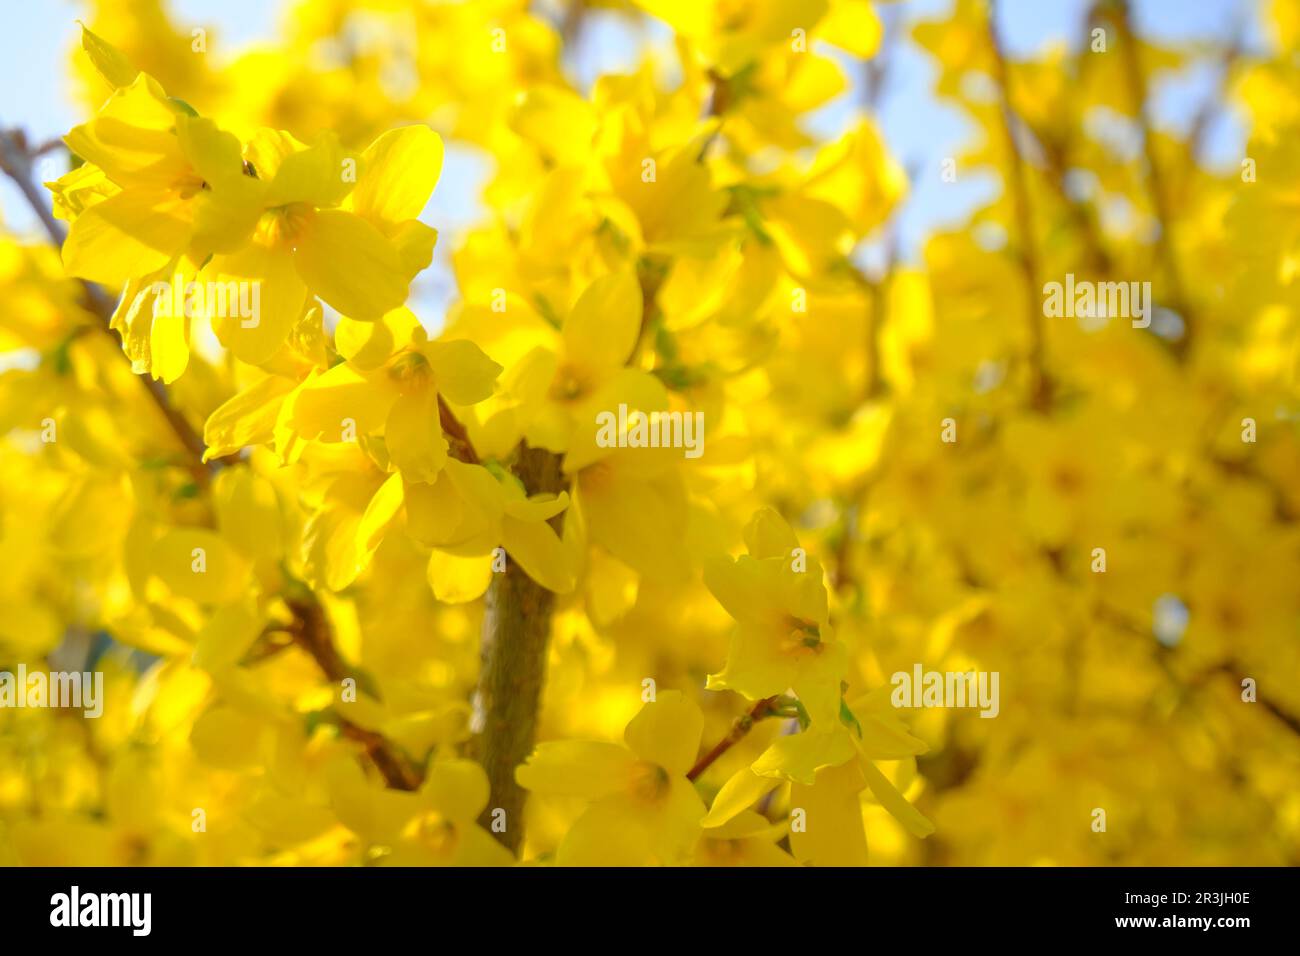 Branch with yellow flowers of Forsythia intermedia, or border forsythia across blue flowers, Spring floral background. Stock Photo